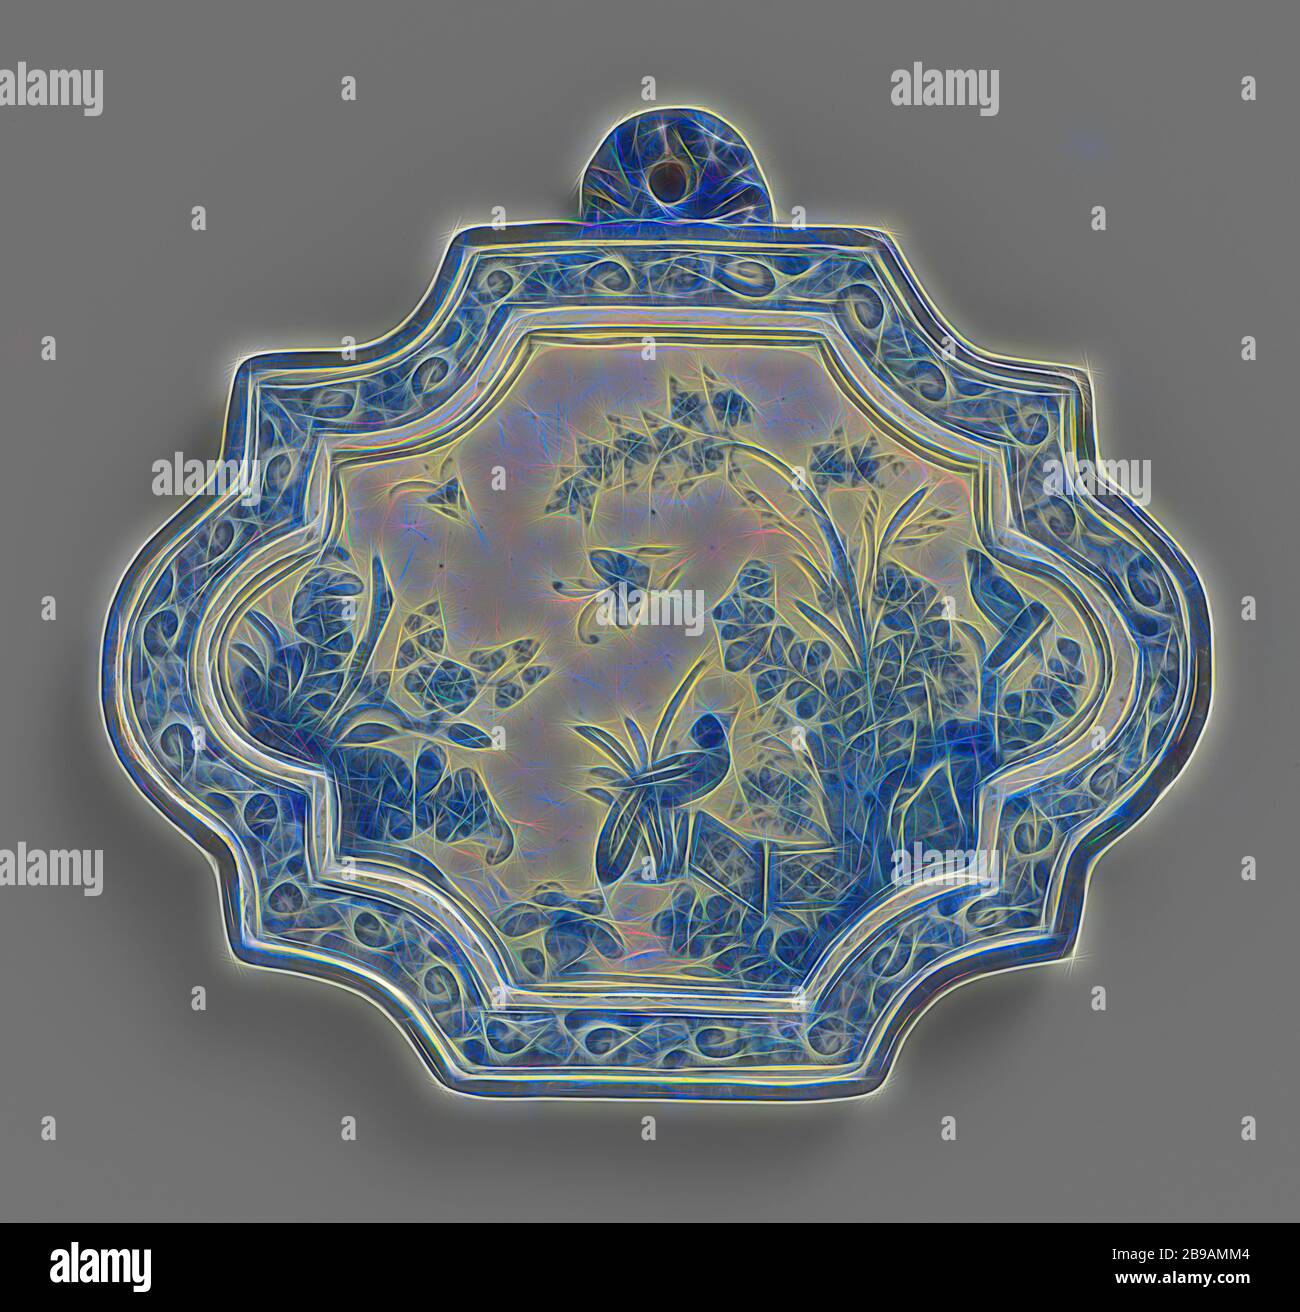 Plaque, Plate, Plate with chinoiserie decoration, faience plate with a chinoiserie decoration, birds, anonymous, Delft, c. 1725 - c. 1750, h 18.5 cm × w 24 cm, Reimagined by Gibon, design of warm cheerful glowing of brightness and light rays radiance. Classic art reinvented with a modern twist. Photography inspired by futurism, embracing dynamic energy of modern technology, movement, speed and revolutionize culture. Stock Photo